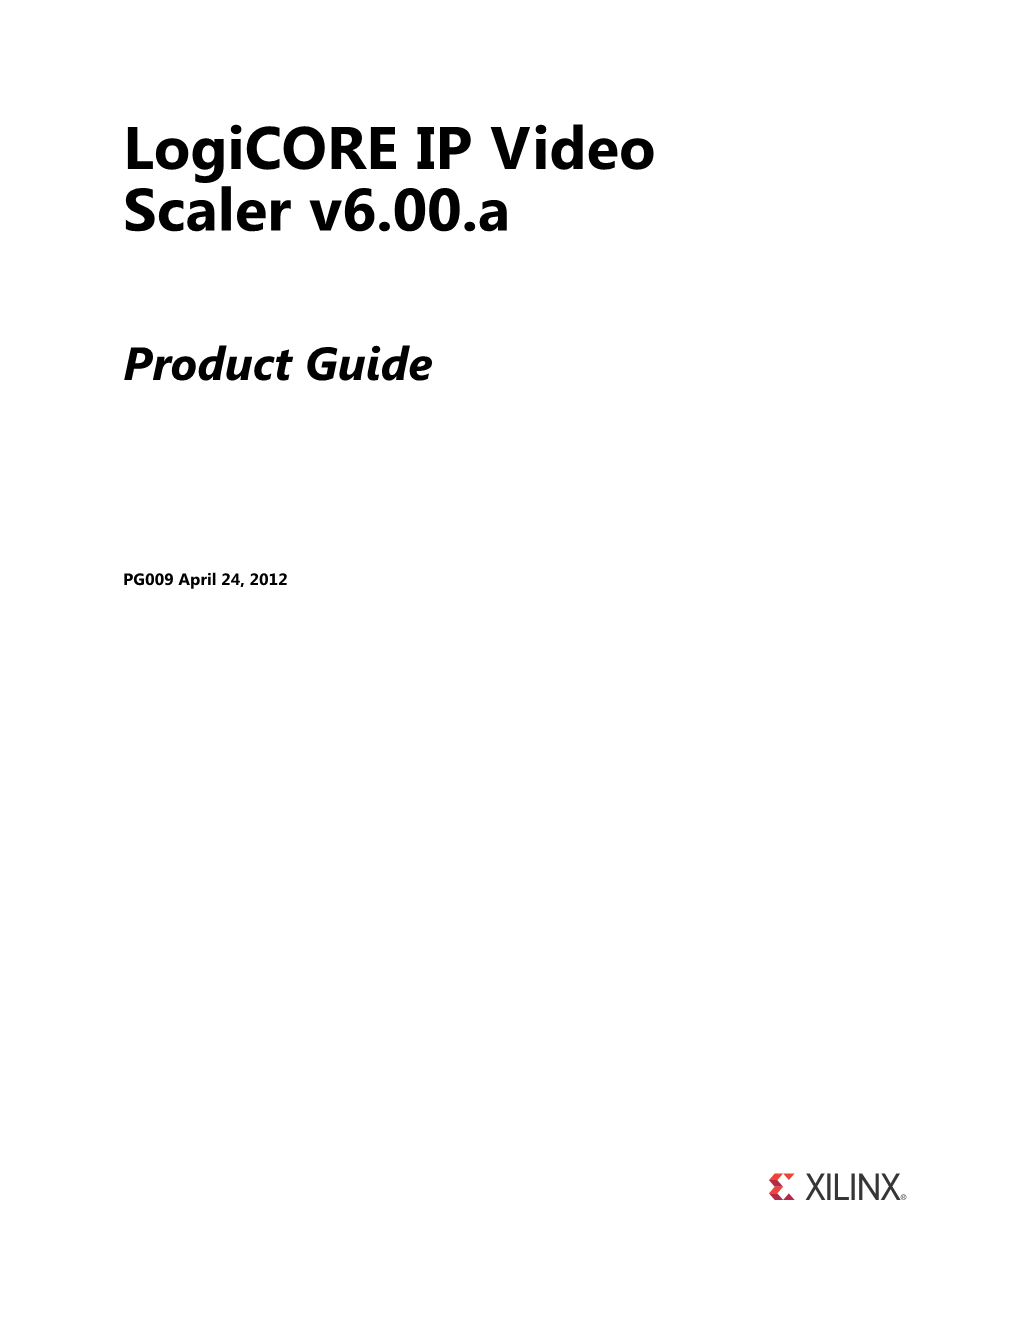 Xilinx PG009 Logicore IP Video Scaler, Product Guide